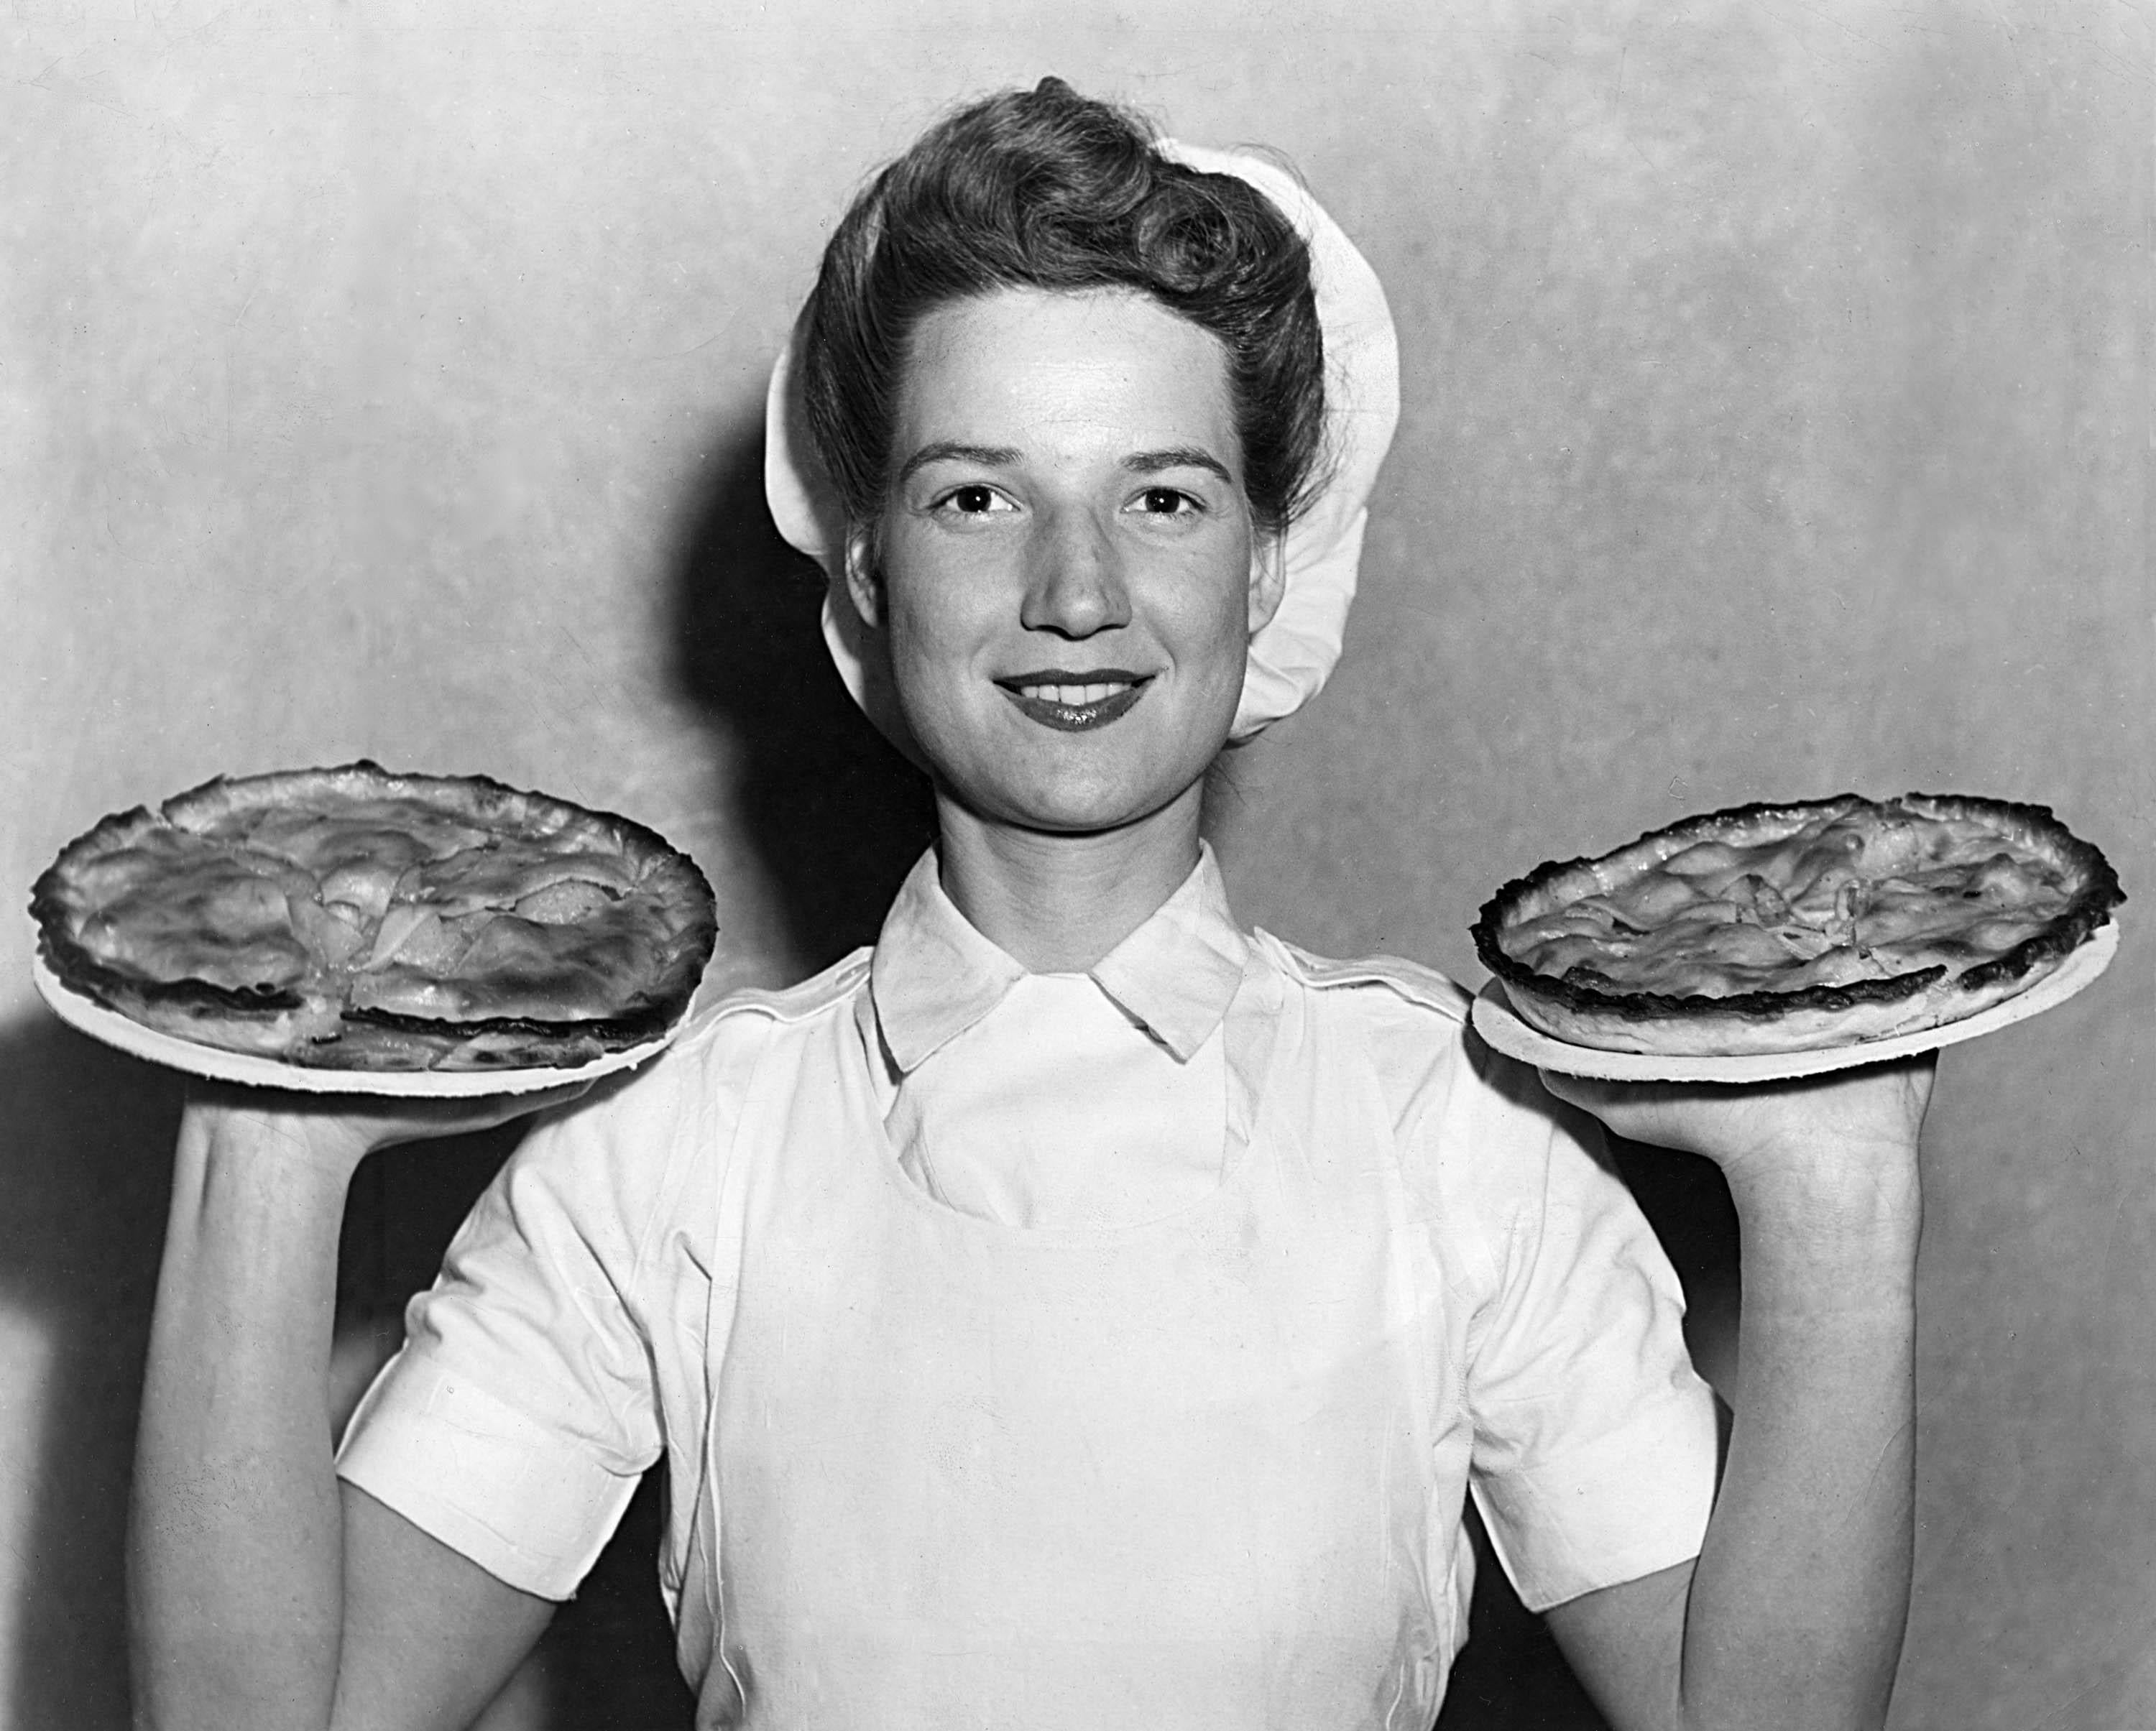 Unknown Black and White Photograph - Gal with Pies